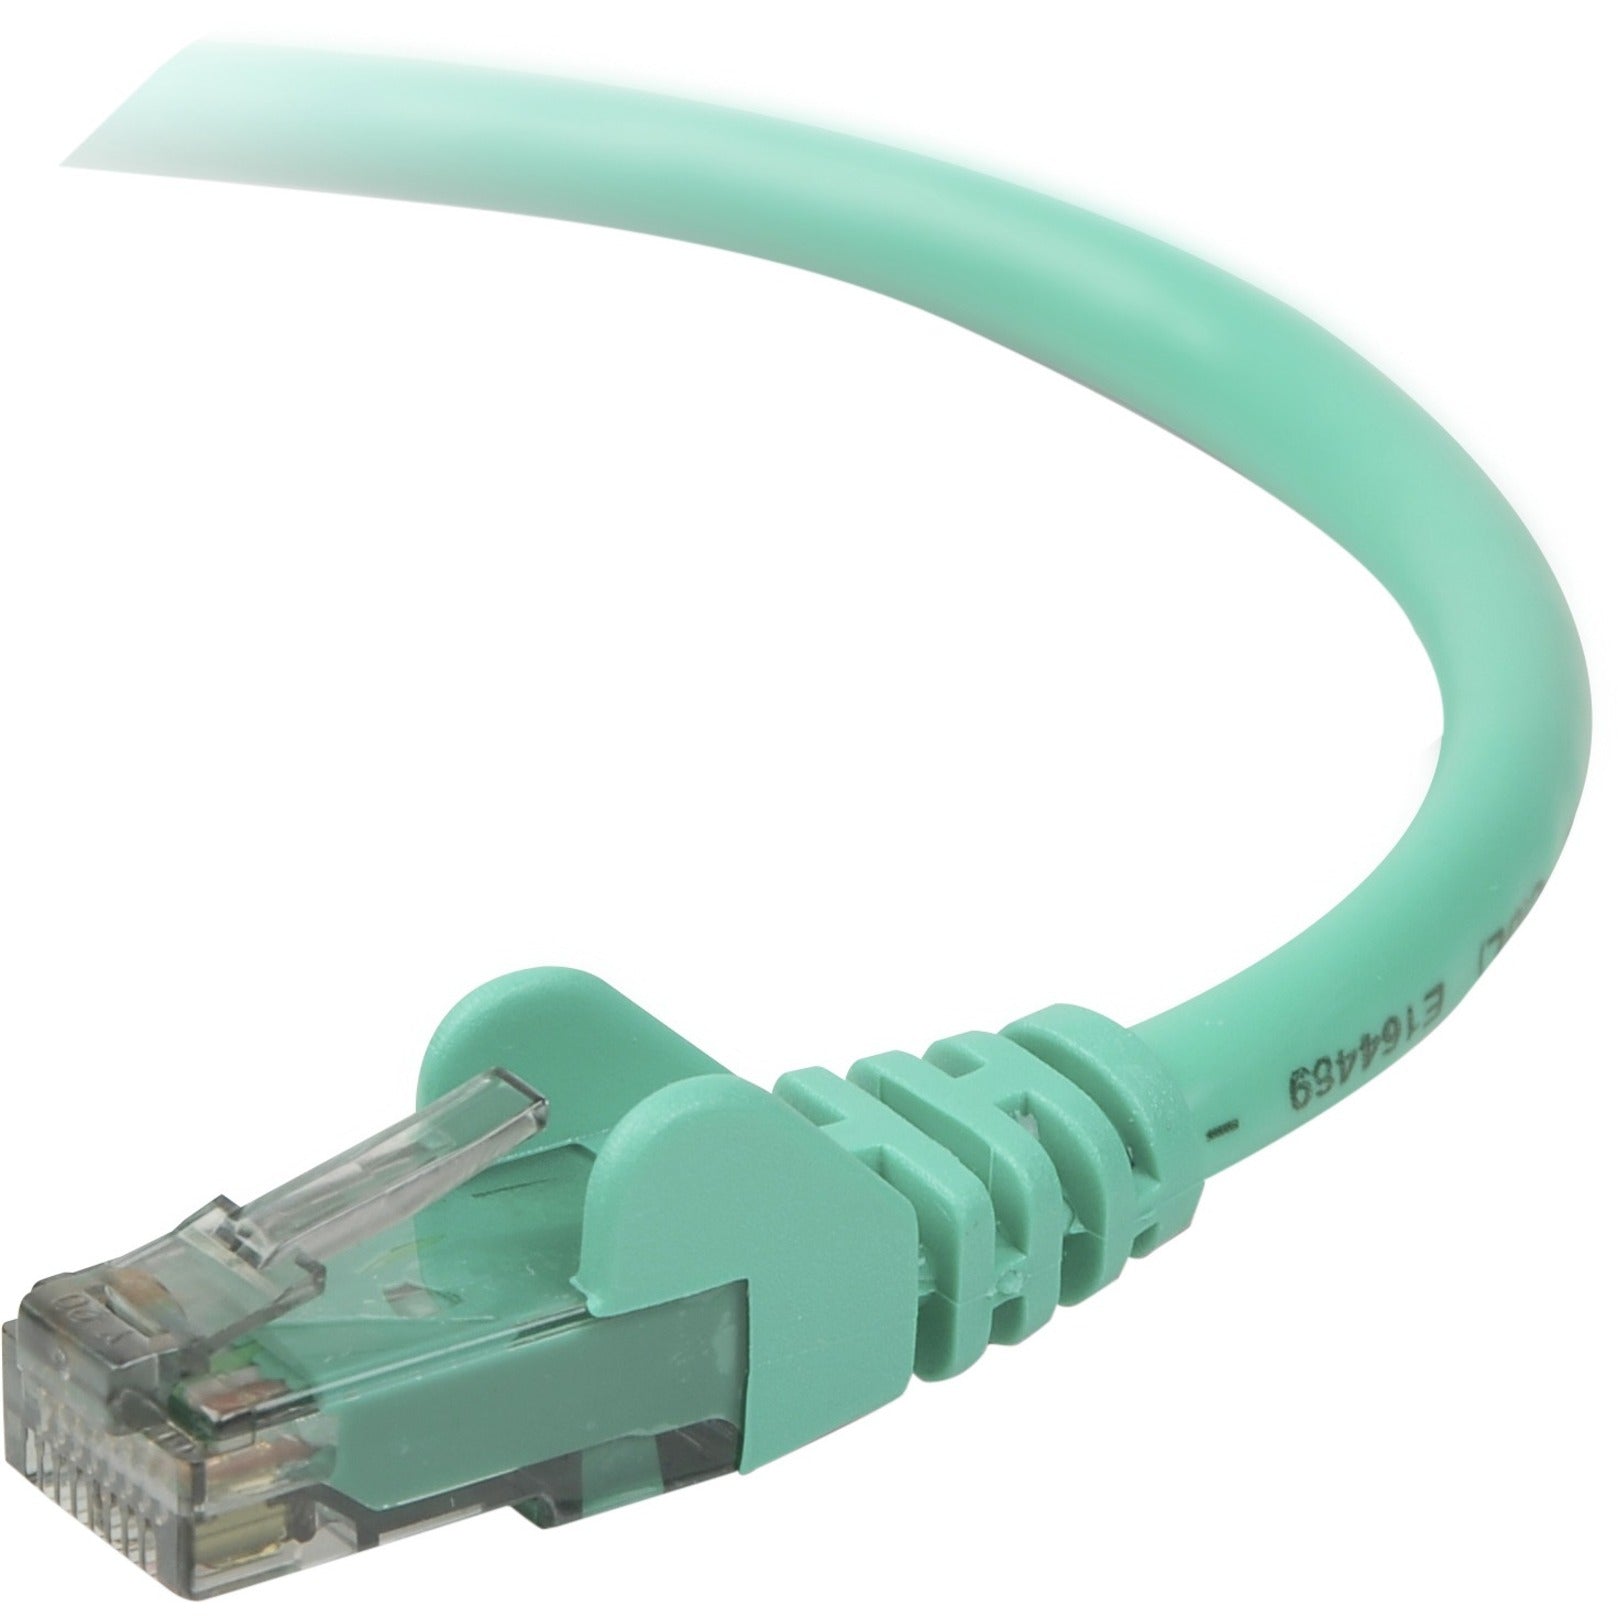 Belkin A3L980-14-GRN RJ45 Category 6 Patch Cable, 14 ft, Green